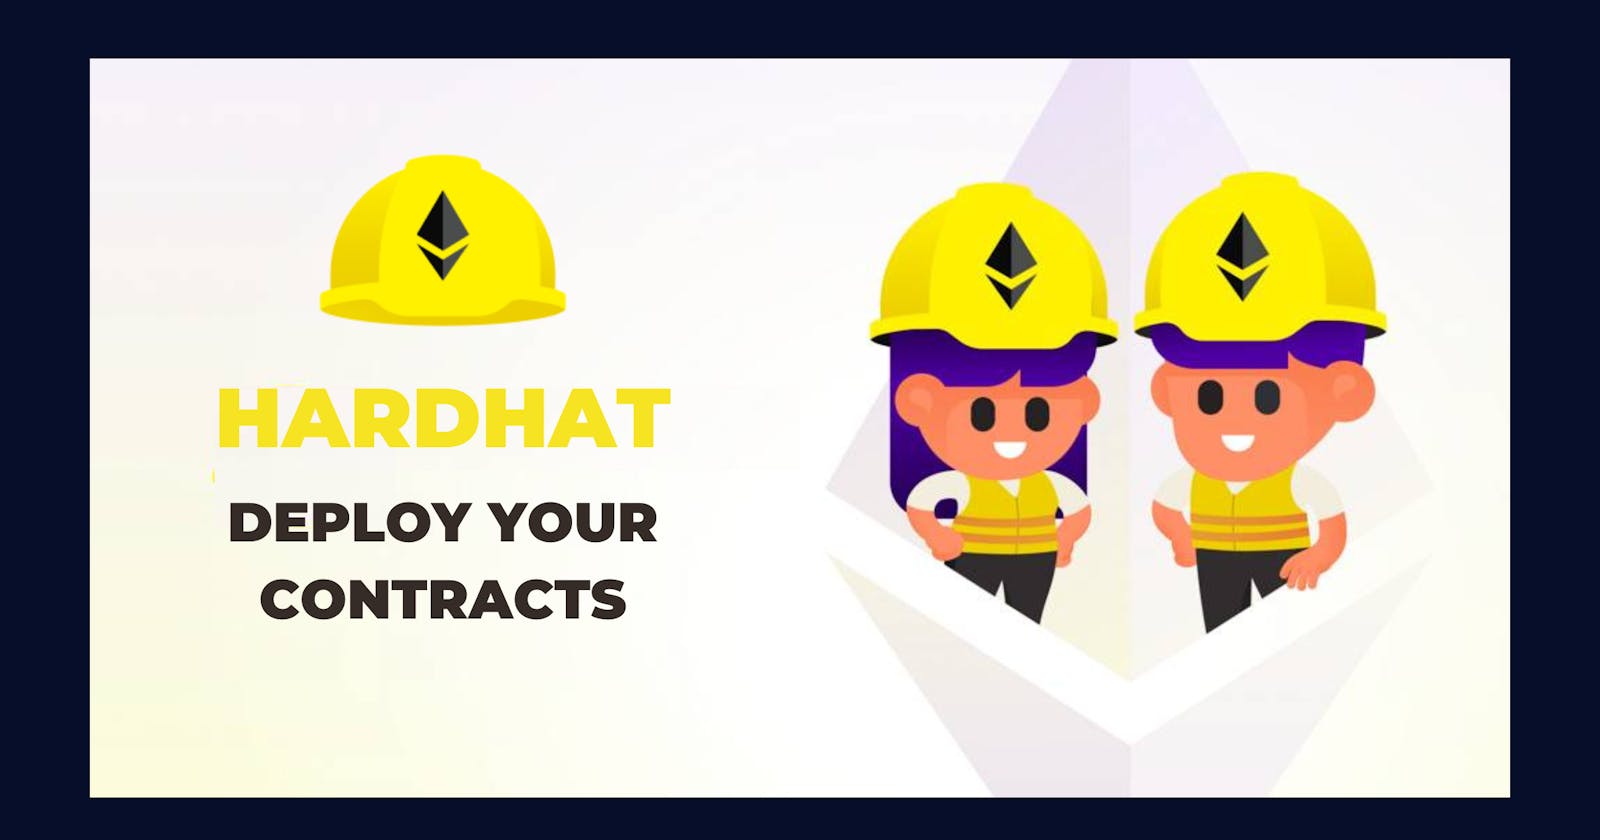 Learn to Deploy Smart Contracts more Professionally with Hardhat